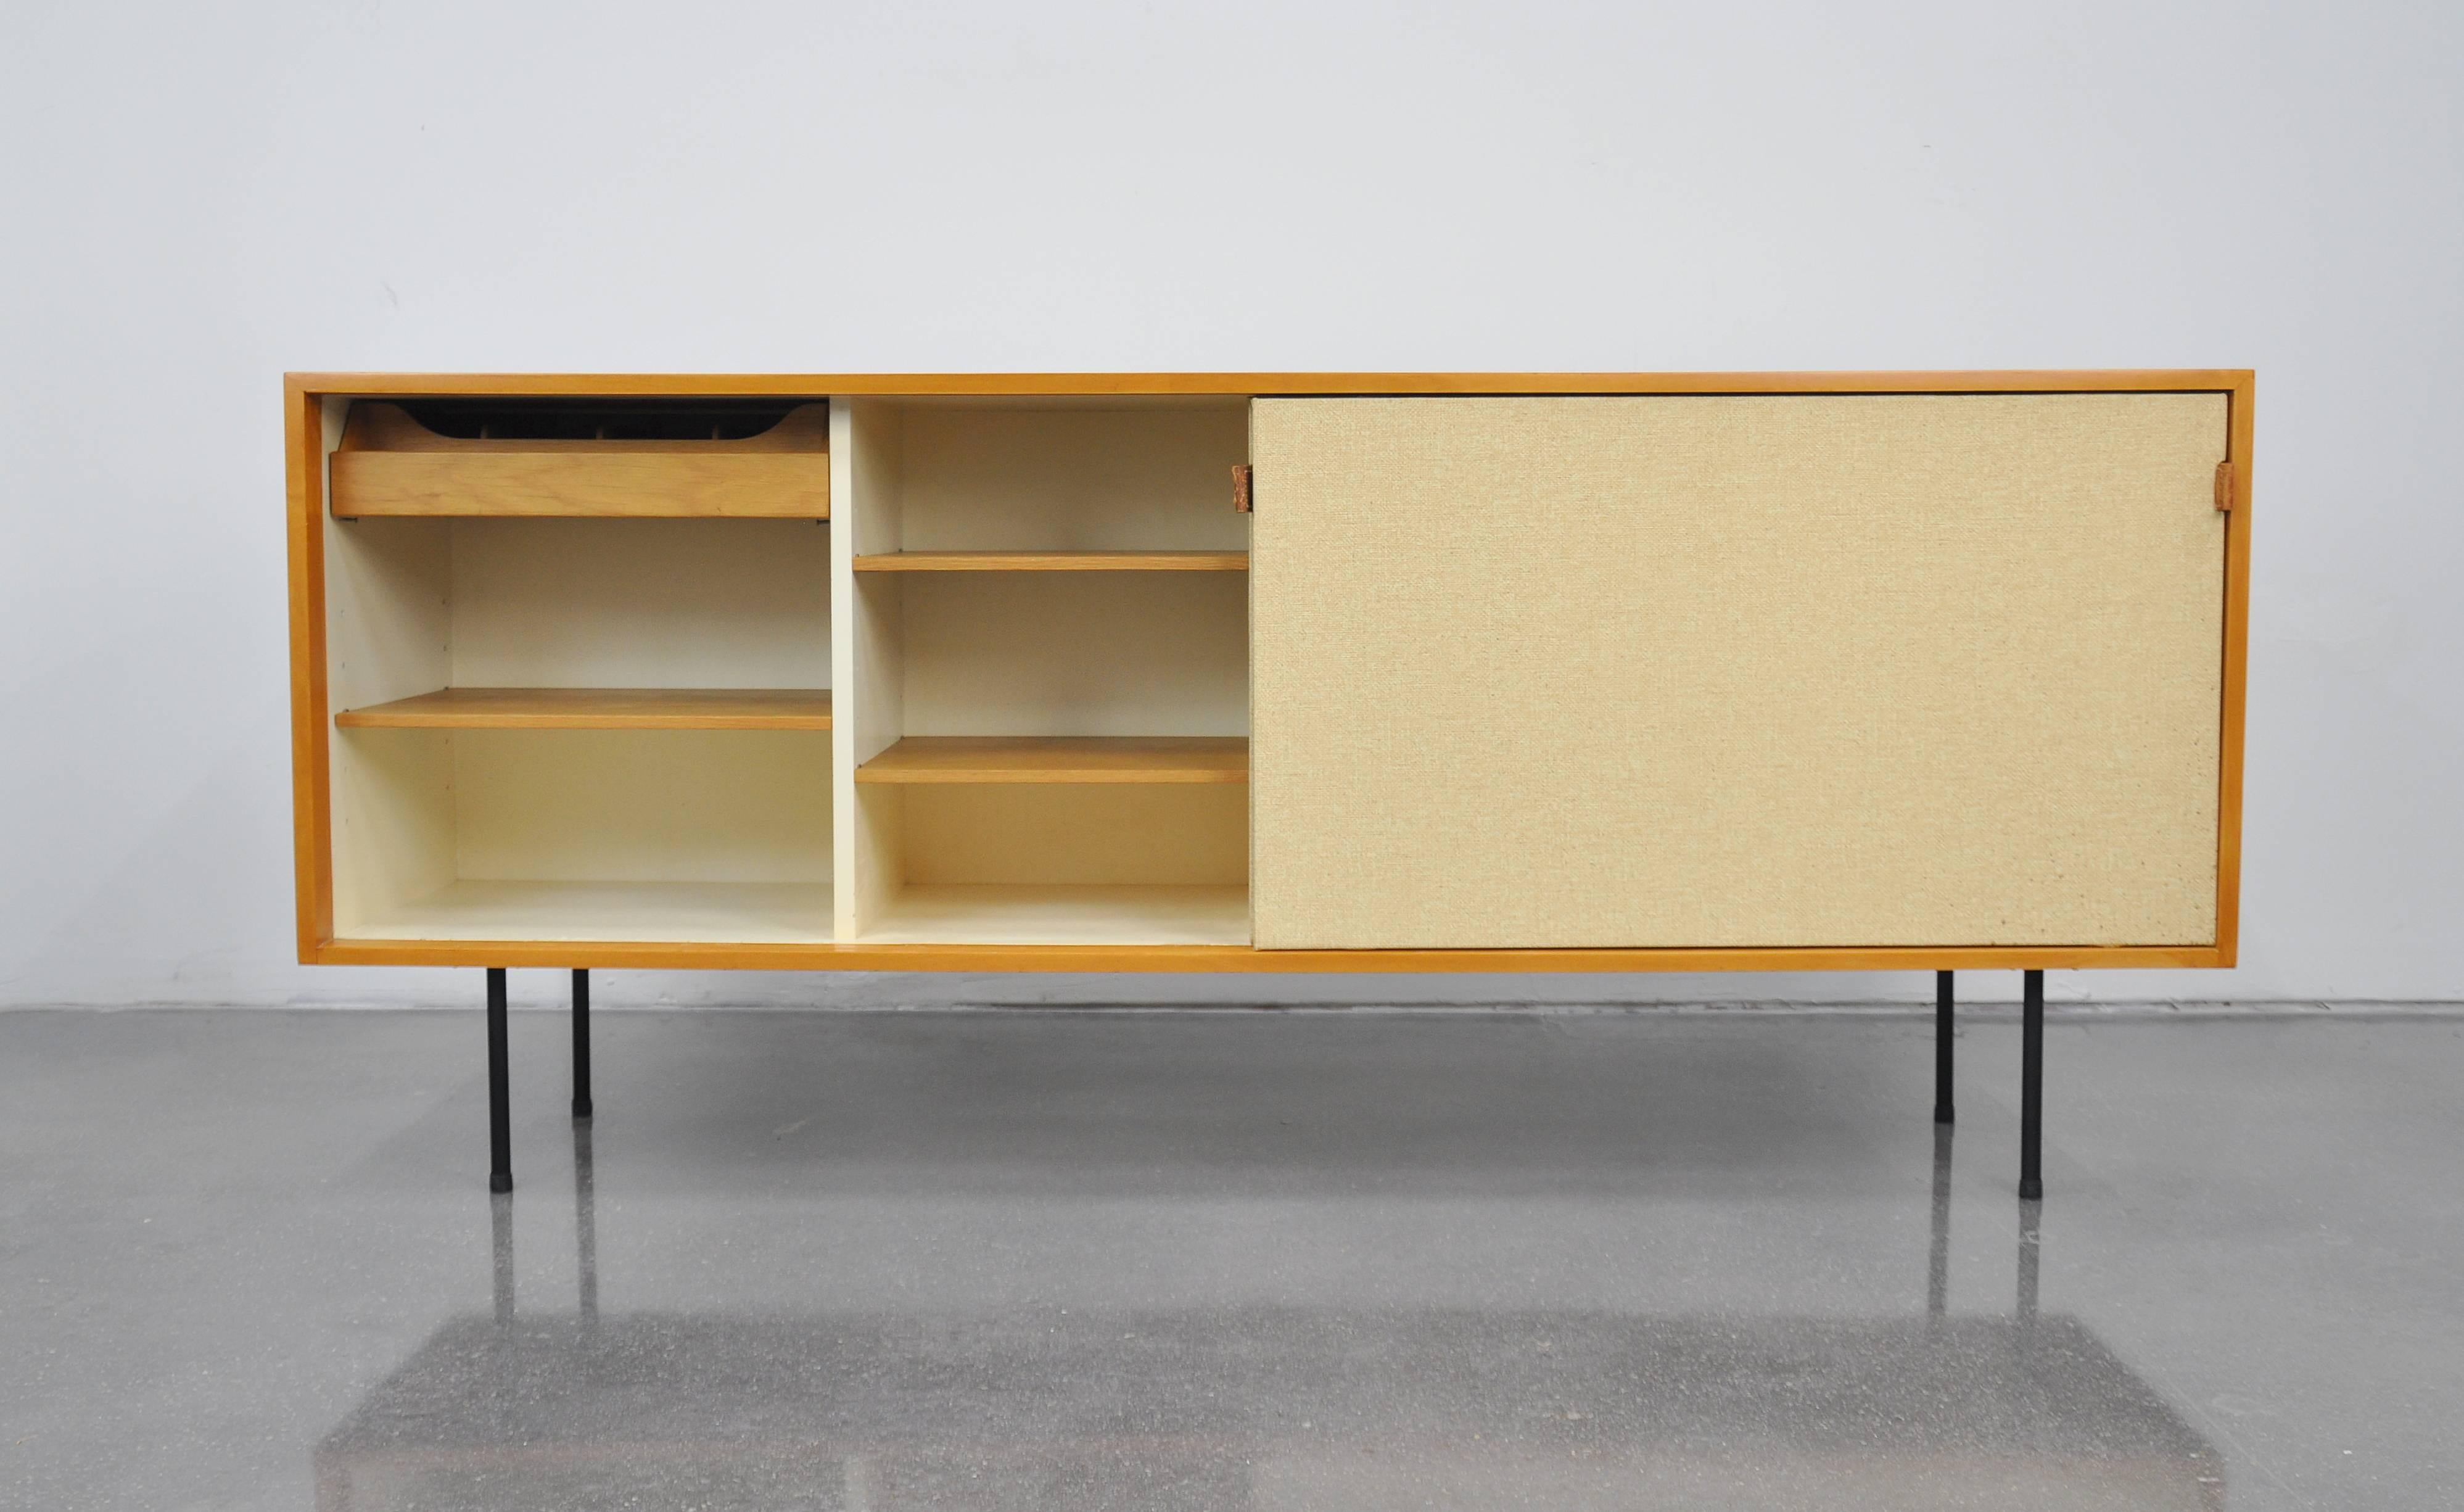 A superb model 116 Mid-Century Modern cabinet designed by Florence Knoll for Knoll Associates in 1948. The vintage sideboard or bar features a pair of sliding doors with seagrass fronts and saddle leather handles, opening to a white lacquered